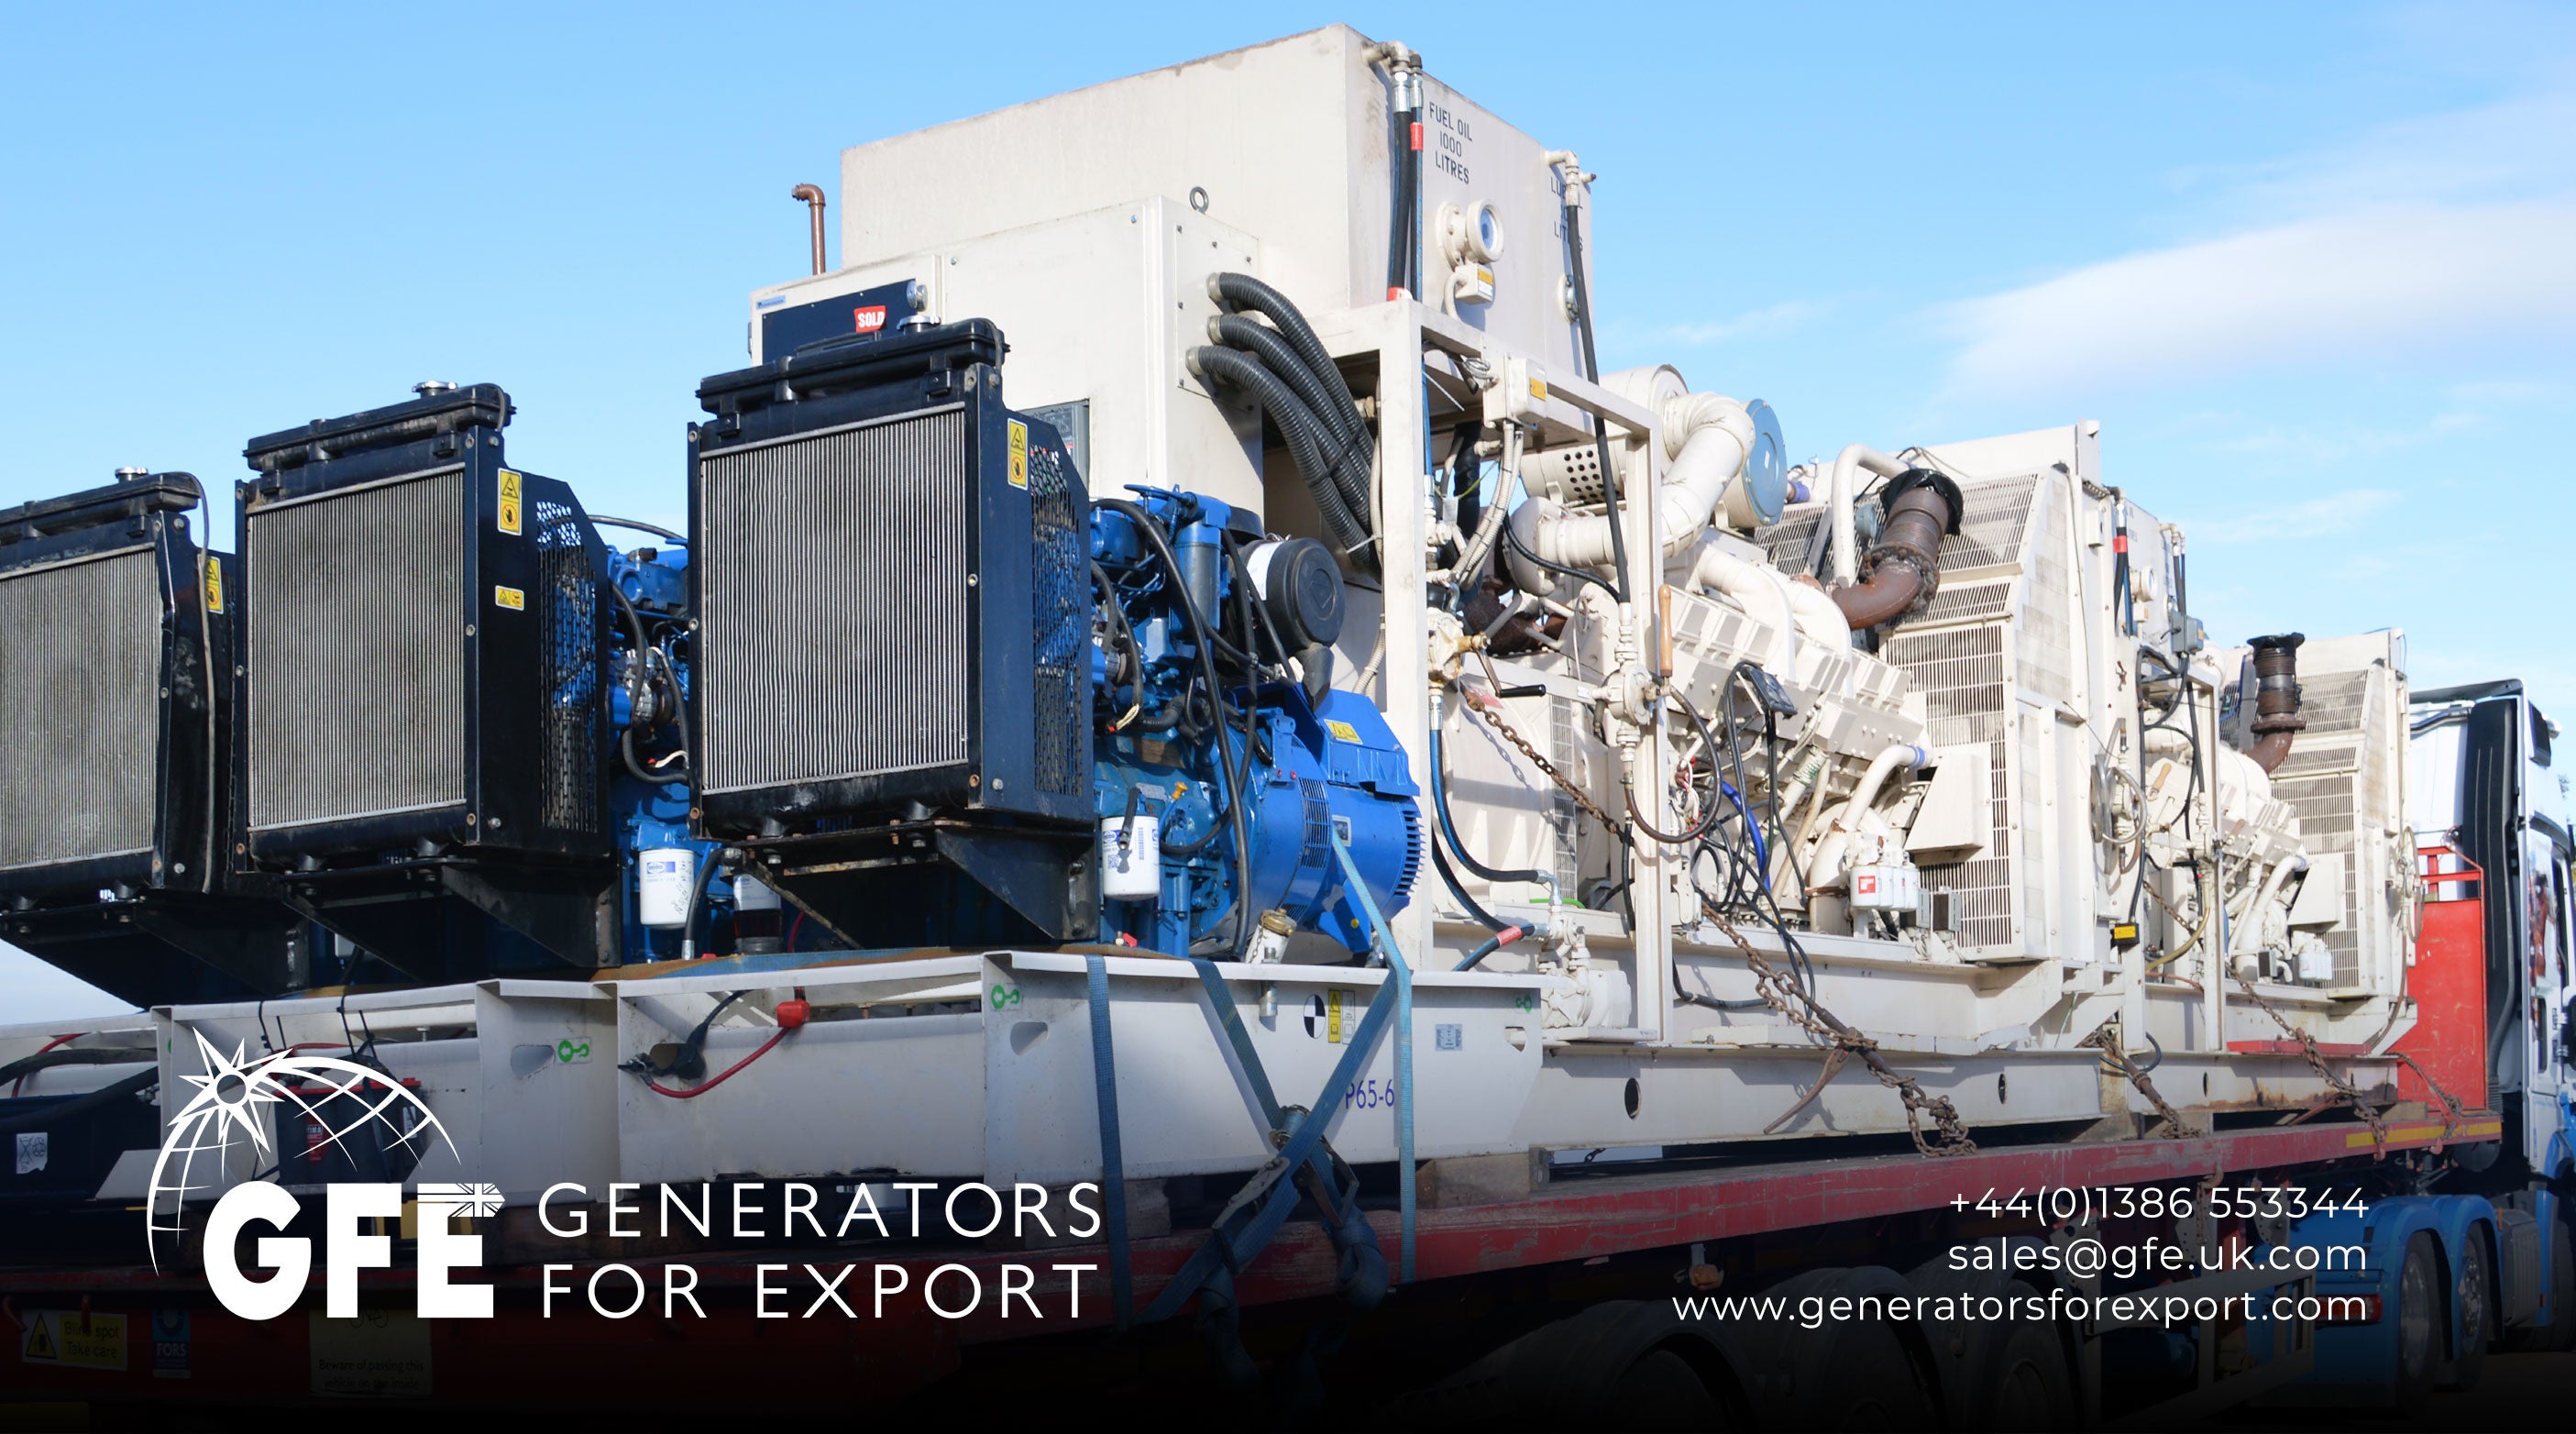 How Can A Generator Help During A Power Cut?